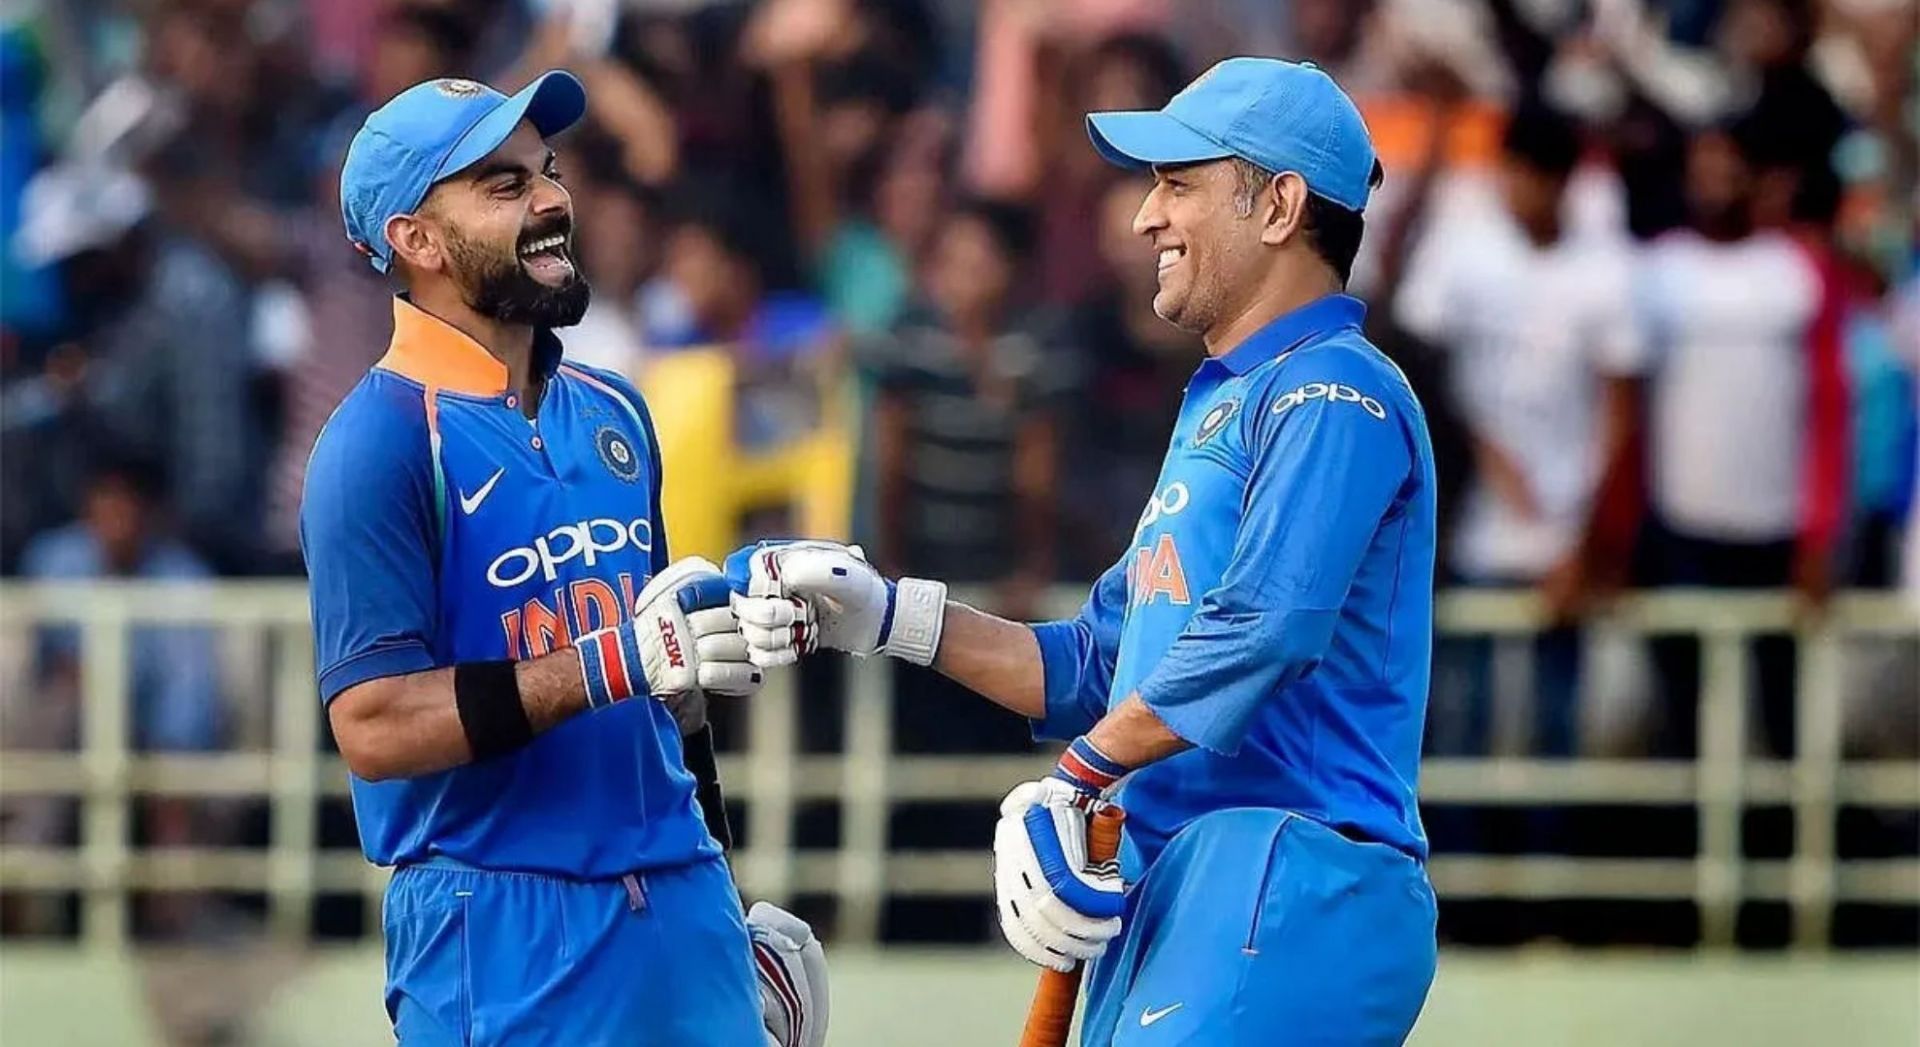 MS Dhoni and Virat Kohli have been part of some of the iconic moments in Indian cricket.